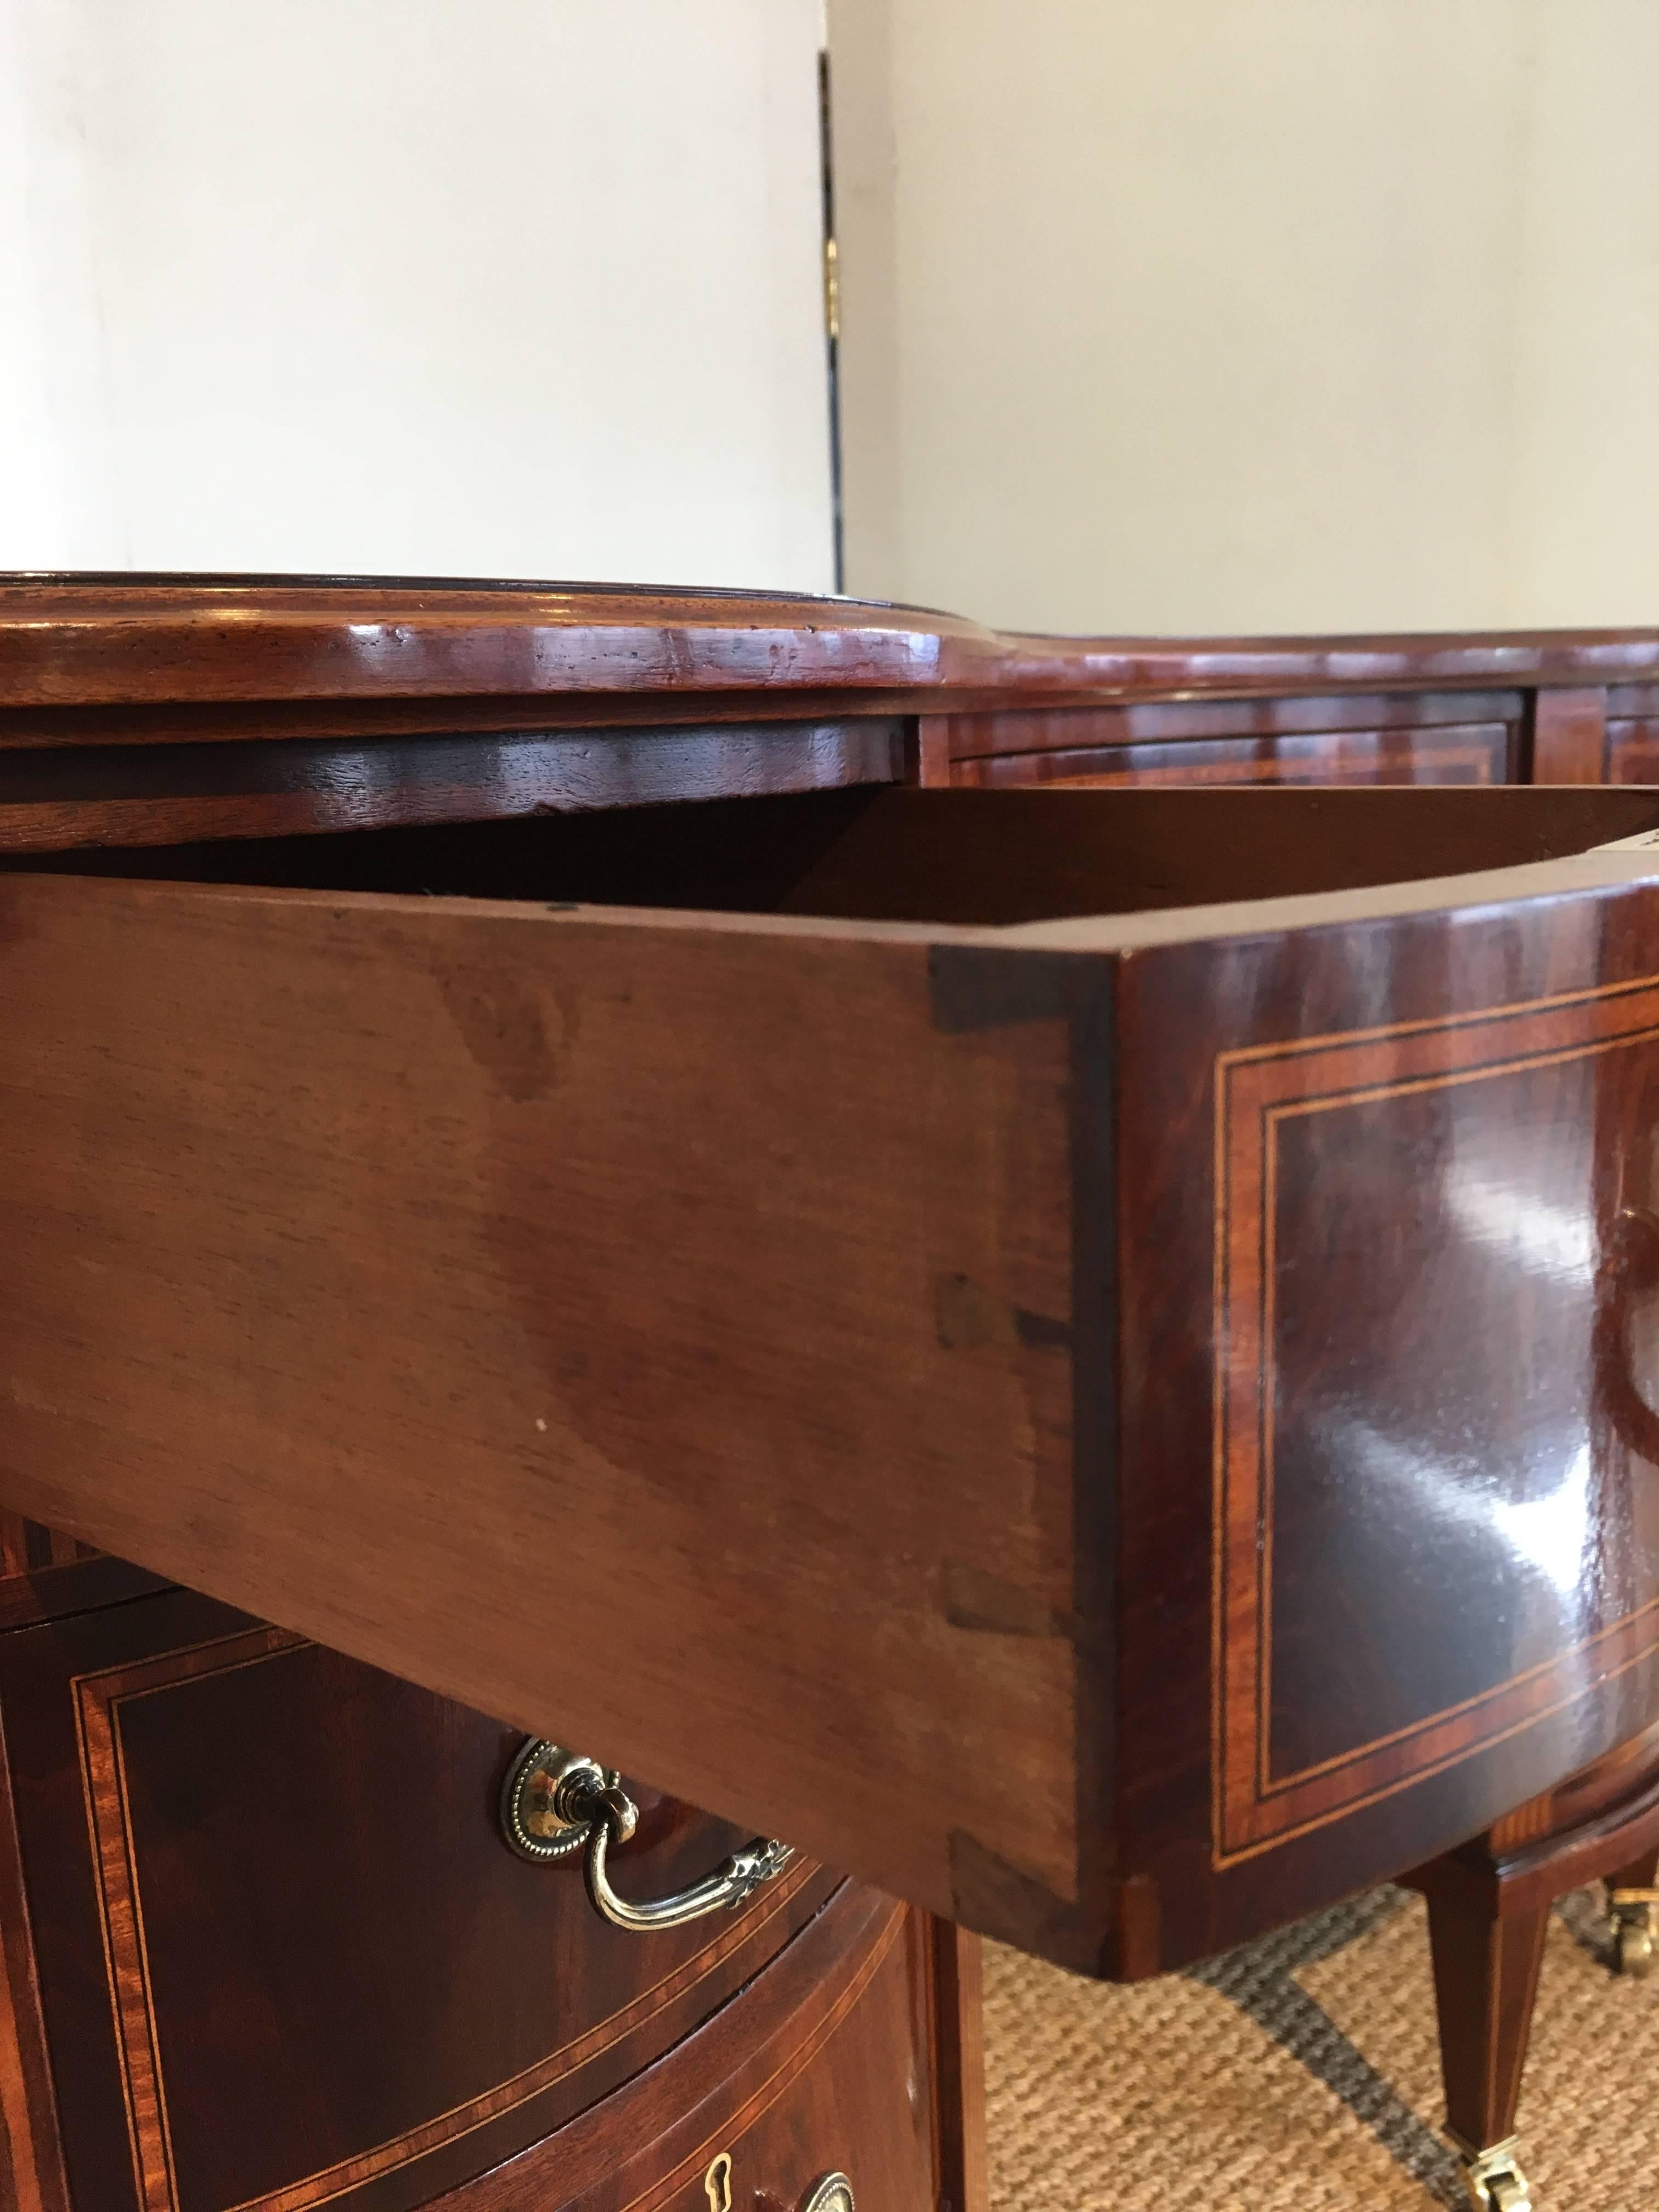 Top quality Edwardian mahogany and inlaid kidney shaped desk 

English, circa 1900 with original leather. Hobbs locks all the drawers are mahogany lined lovey brass castors

This piece has been through our workshops and been cleaned and polished